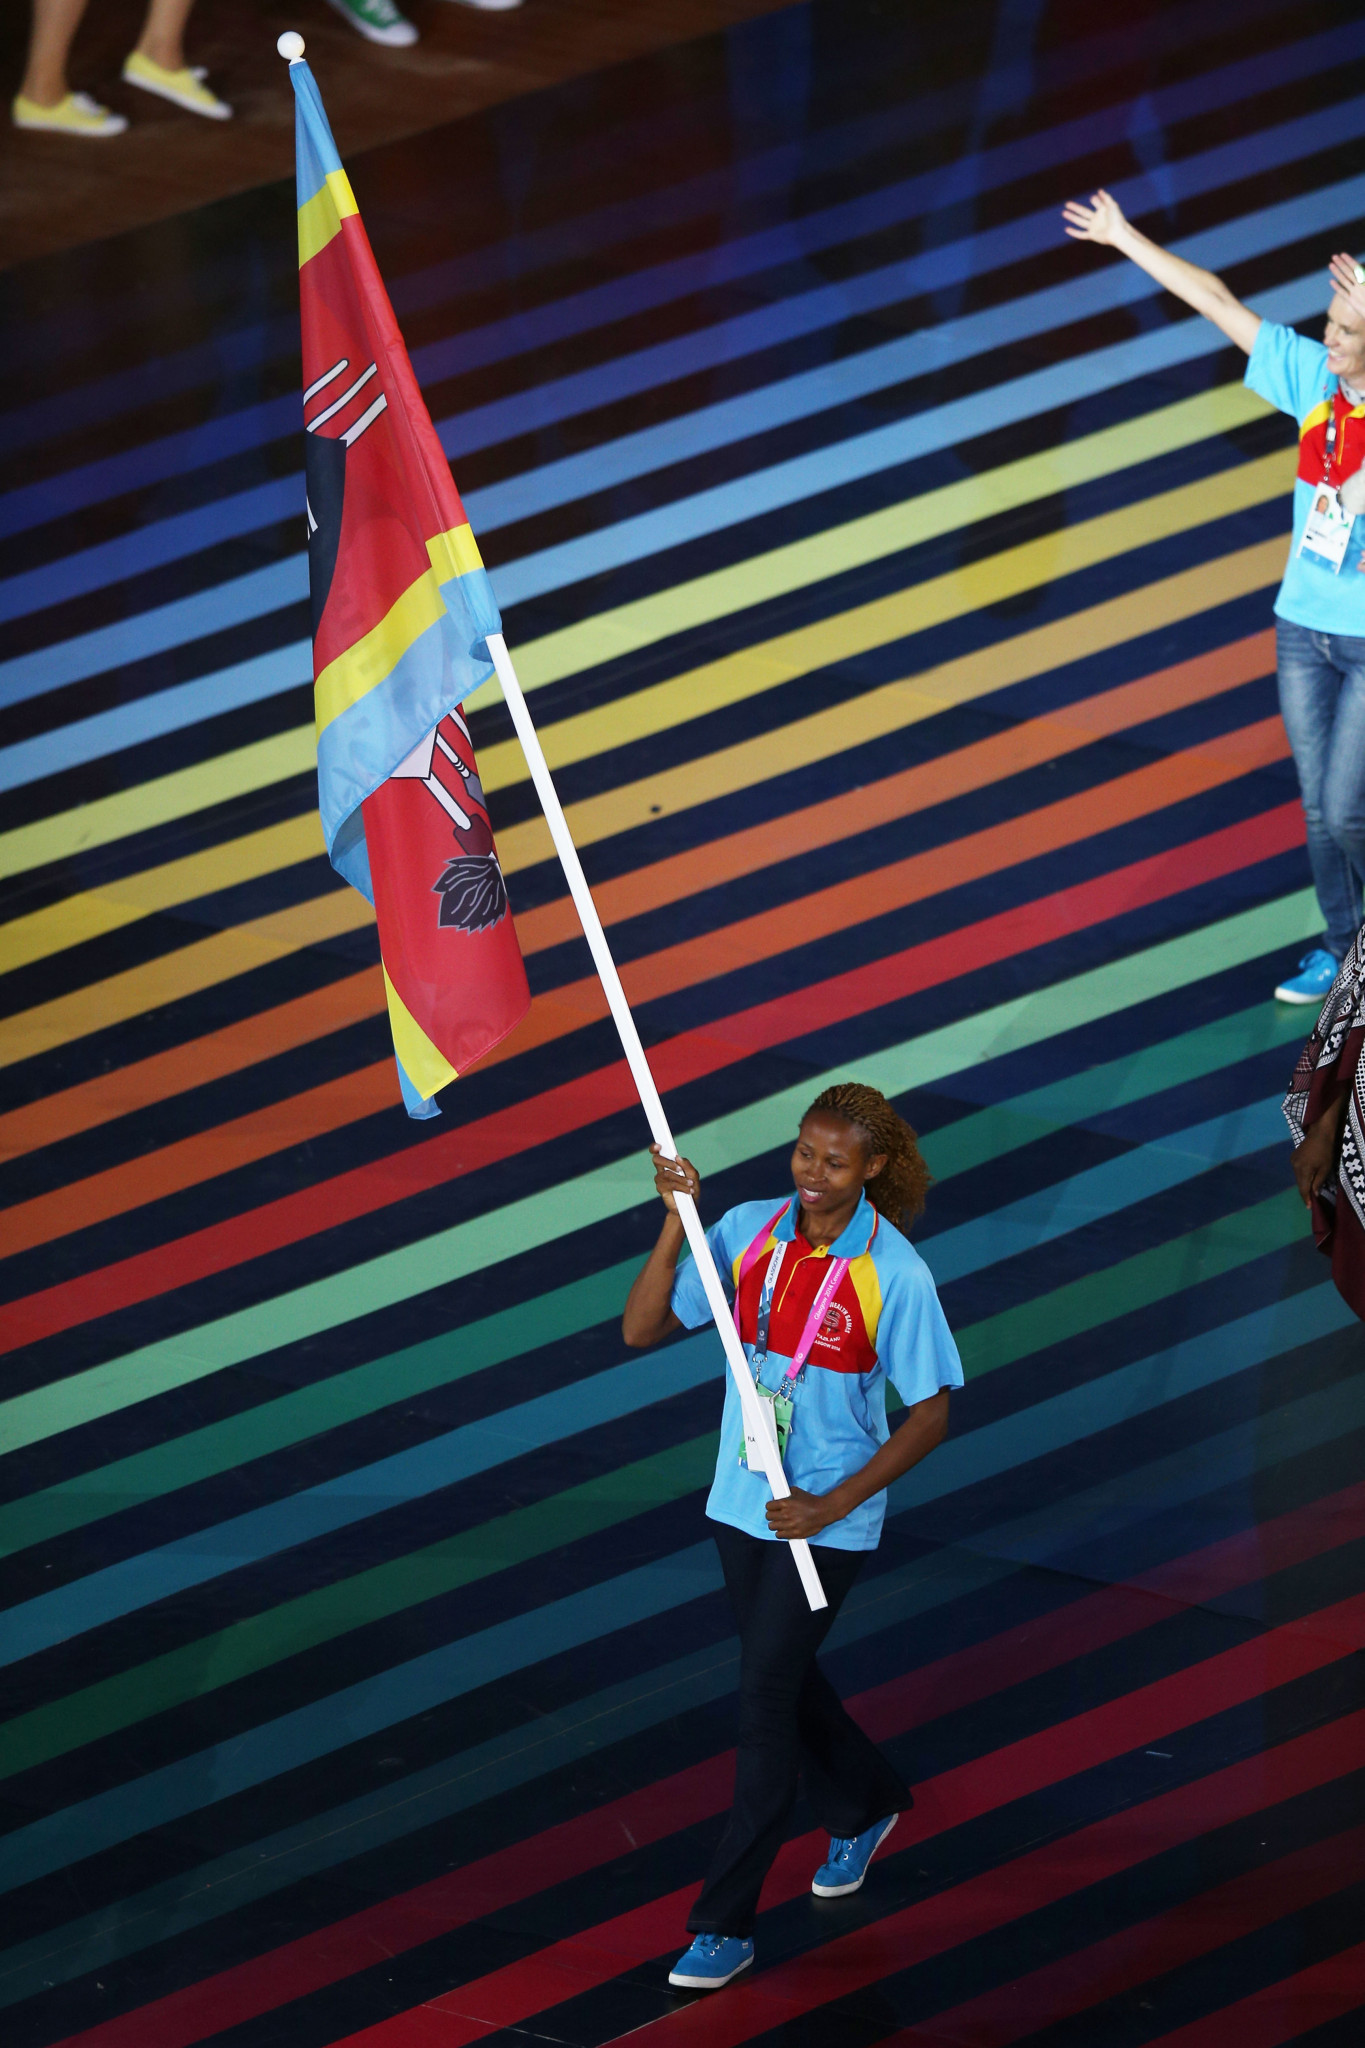 Phumlile Ndzinisa carries the Swaziland flag at the Glasgow 2014 Commonwealth Games ©Getty Images